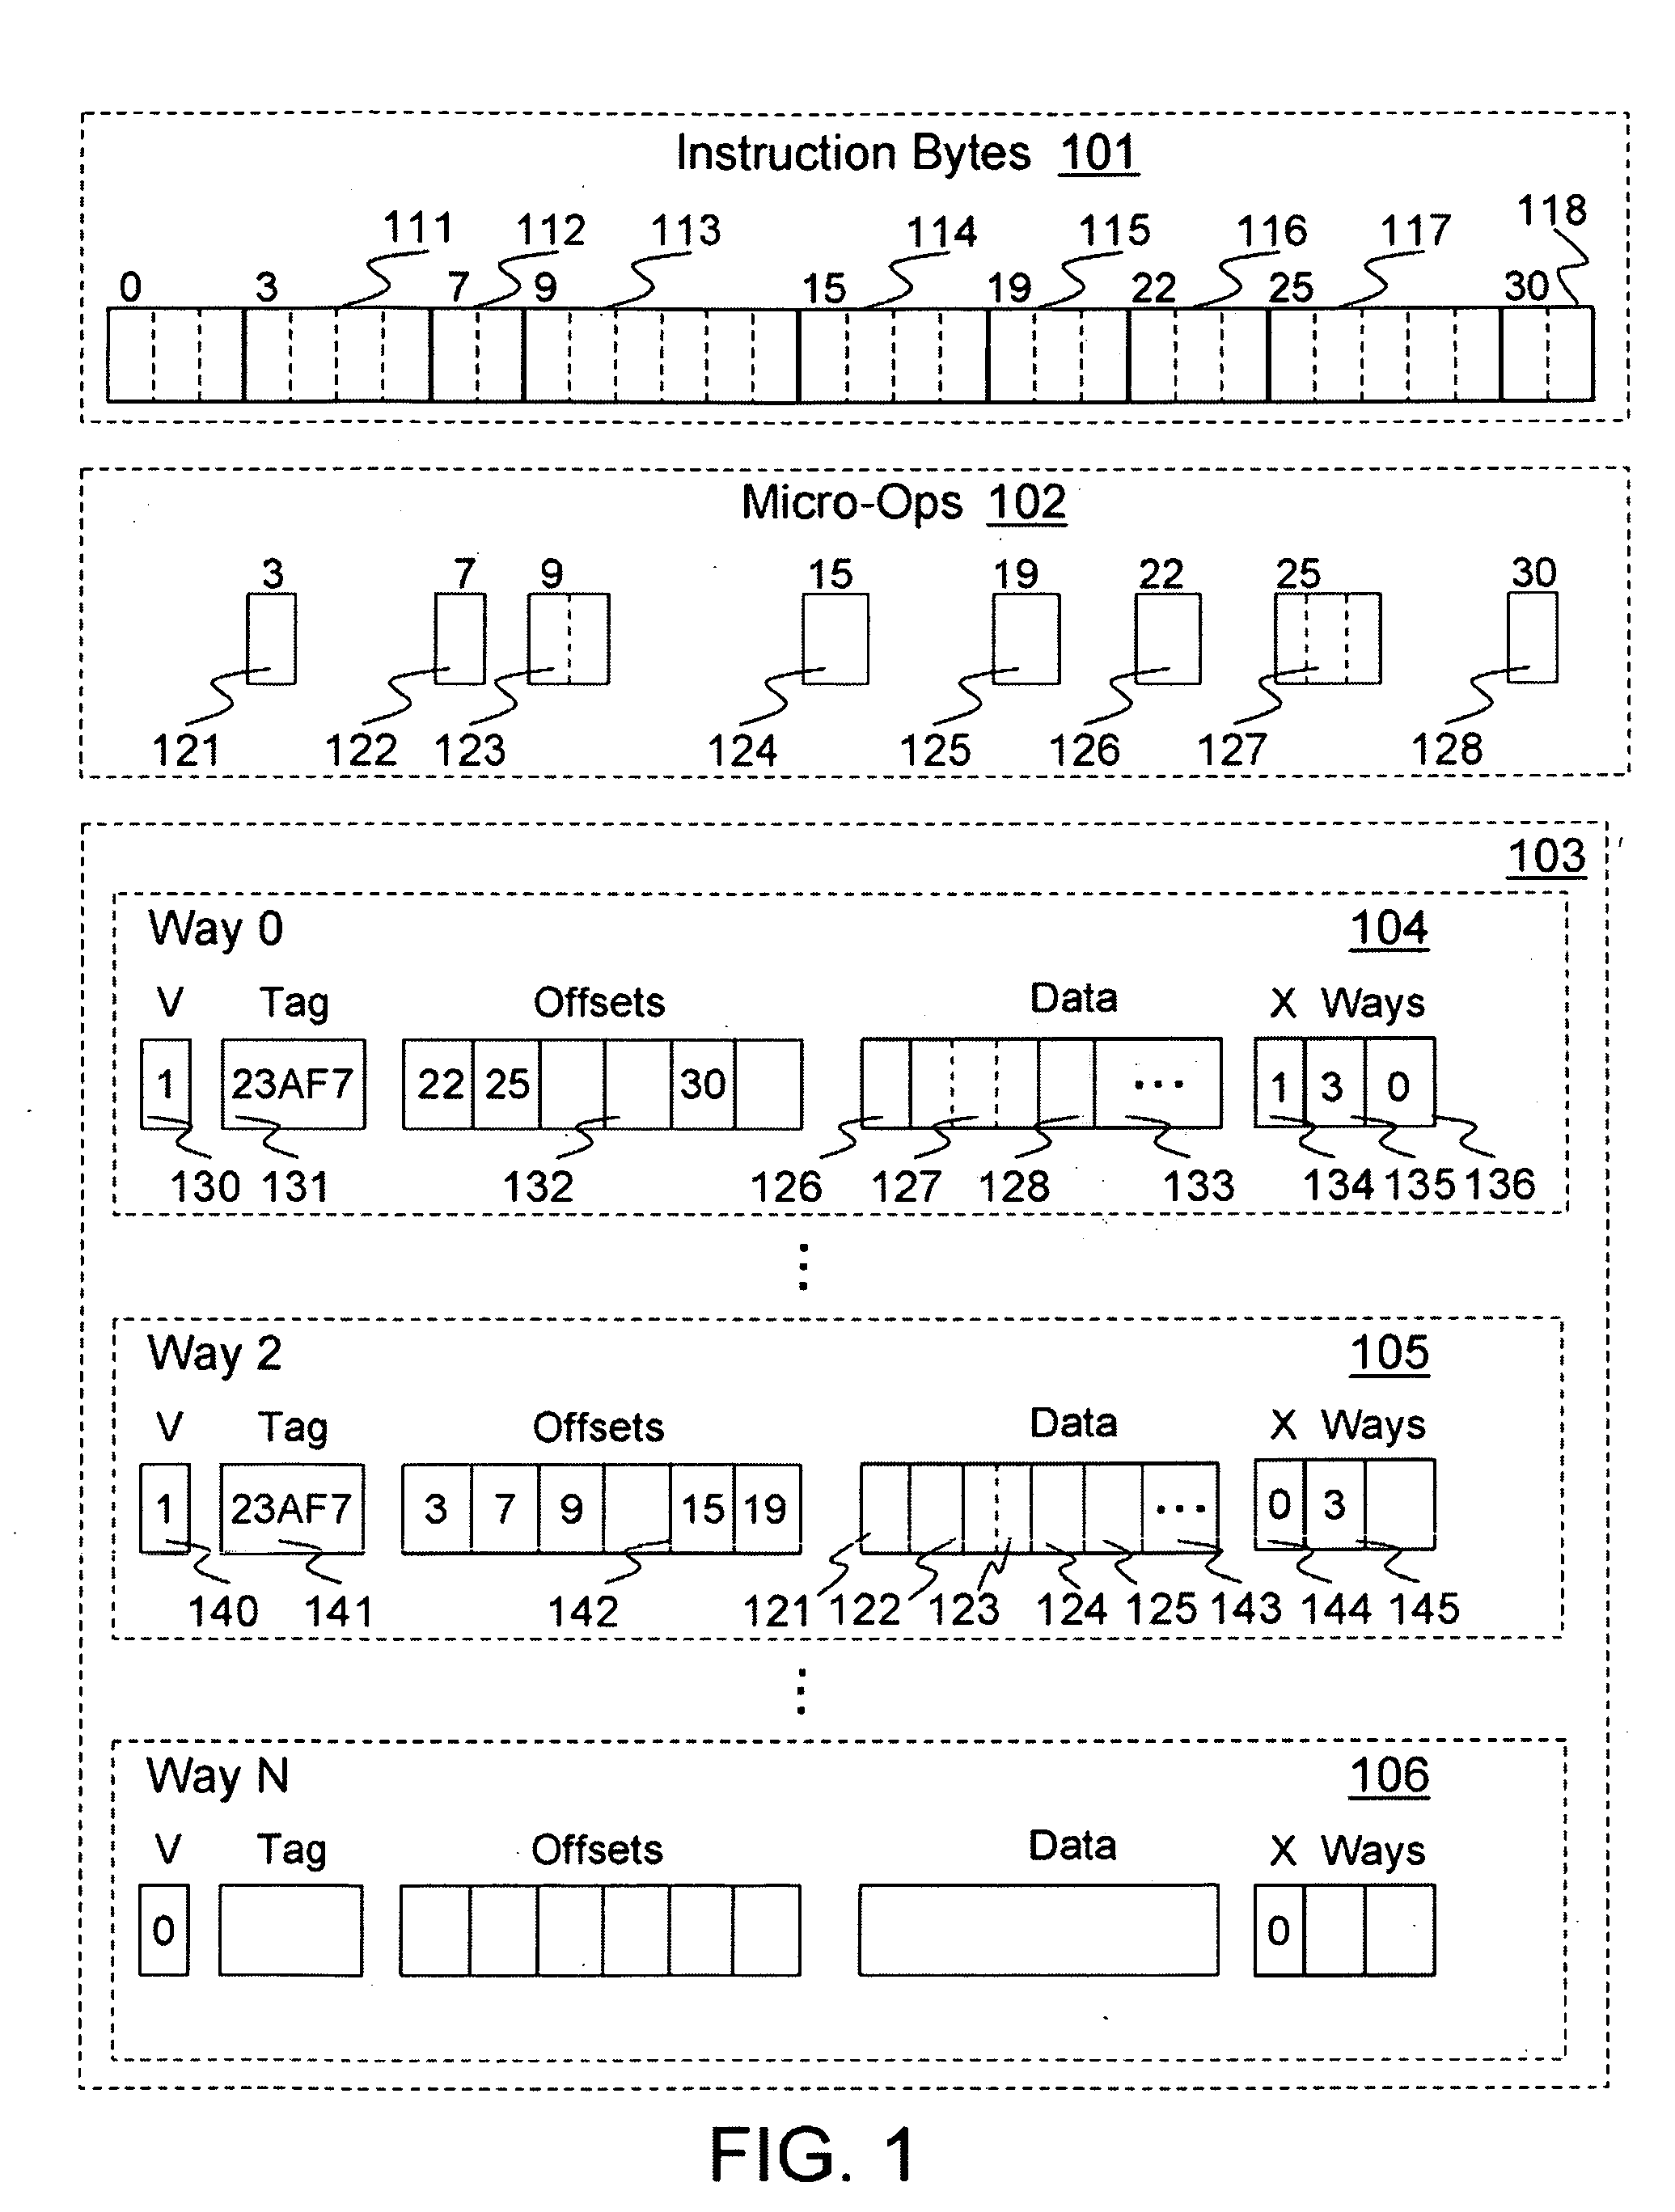 Method and apparatus for pipeline inclusion and instruction restarts in a micro-op cache of a processor